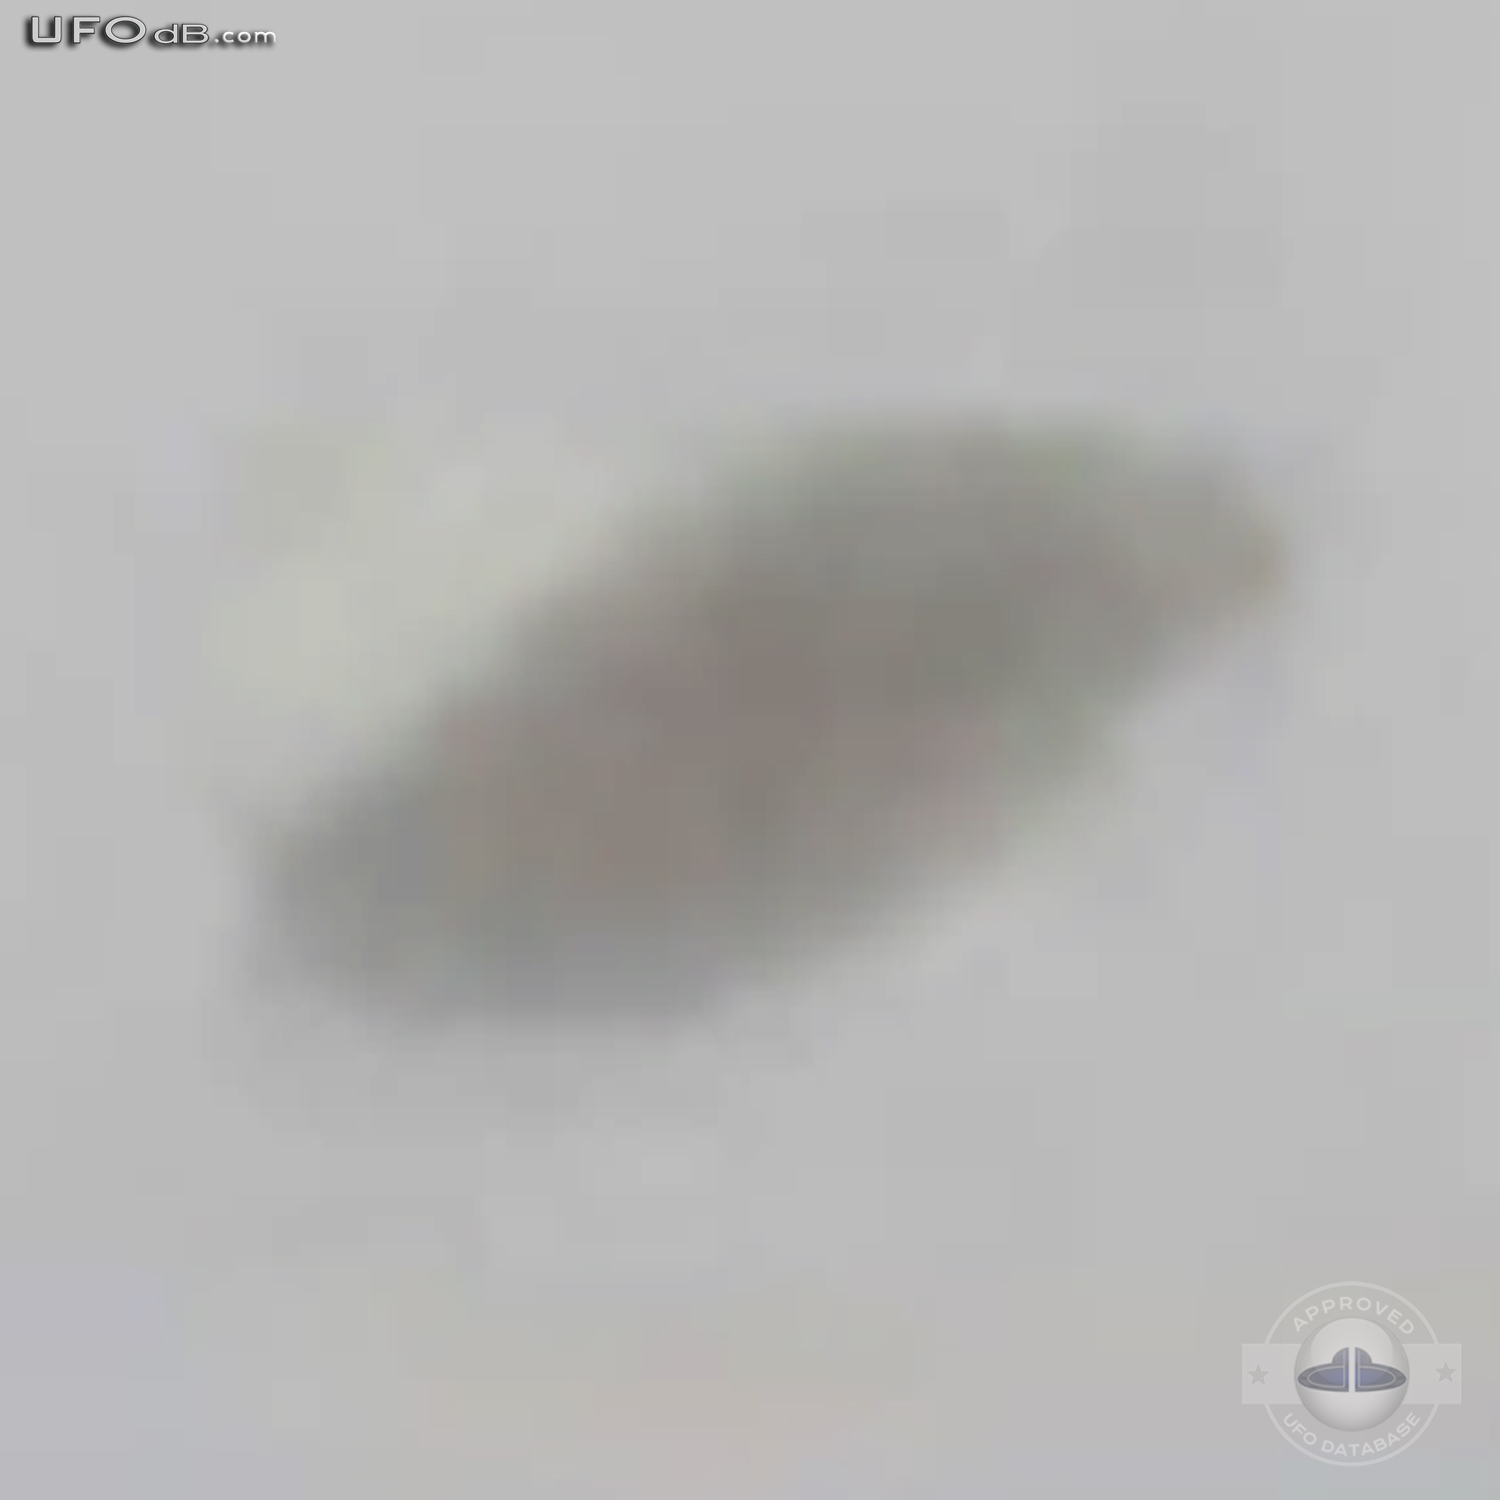 Humming whirring sounds heard with UFO picture | Hangzhou | April 2011 UFO Picture #332-7